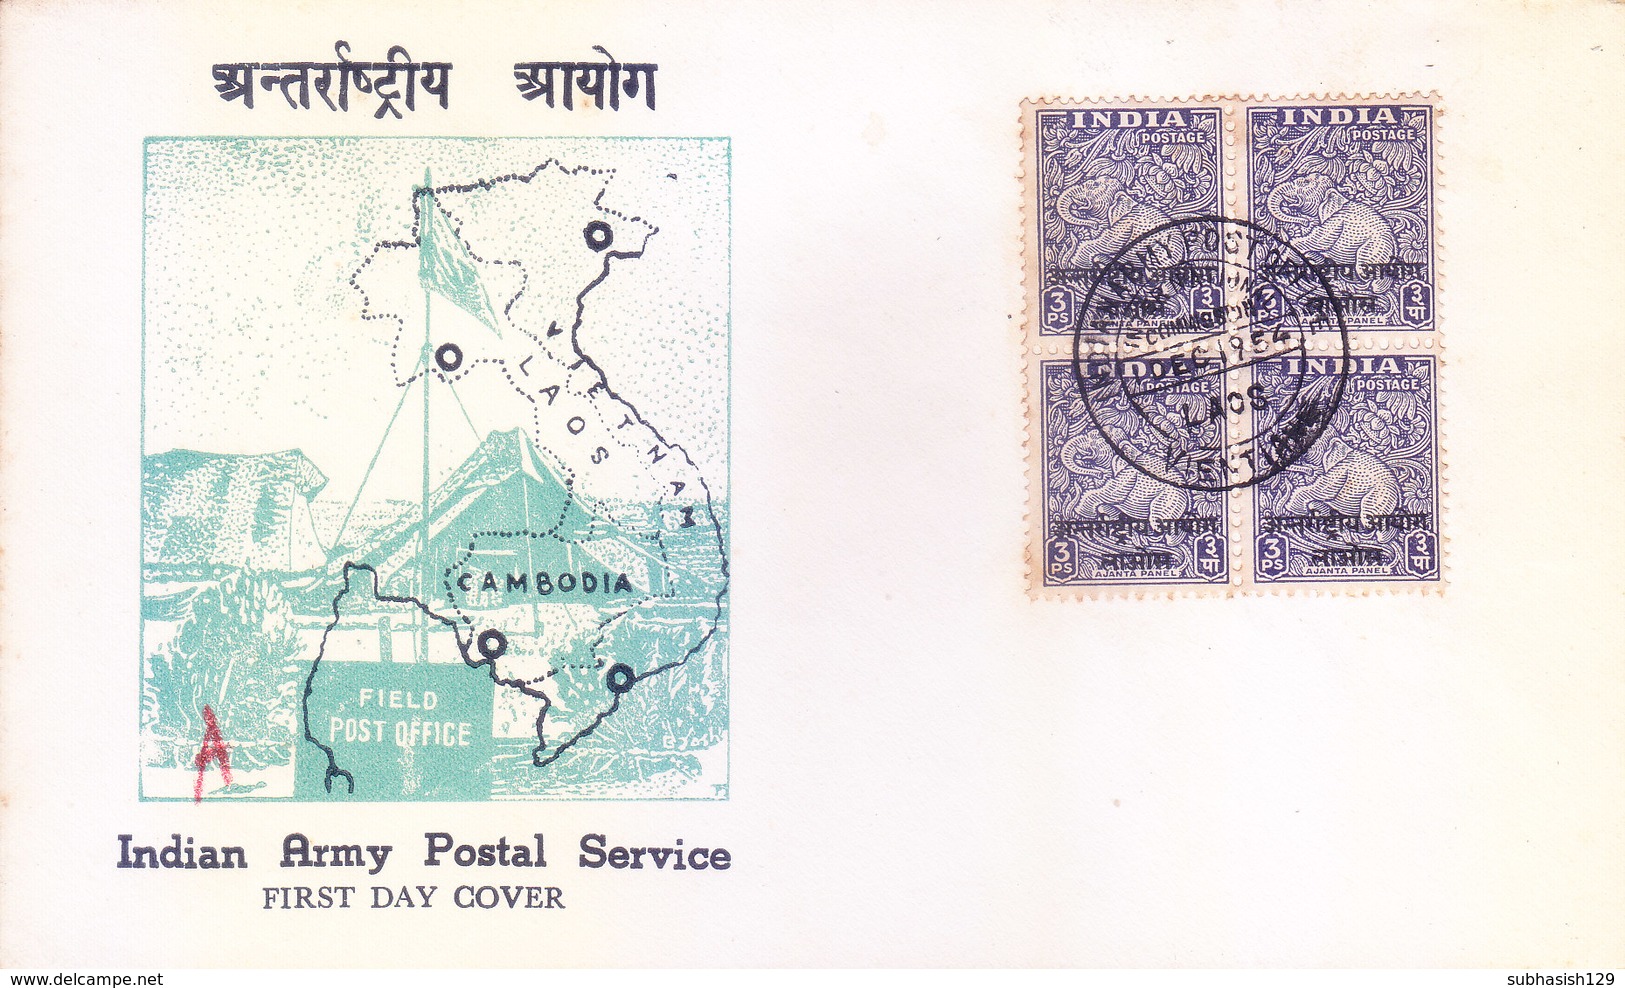 INDIA 1954 FIRST DAY COVER - INTERNATIONAL CONTROL COMMISSION - LAOS, VIETNAM - Franchigia Militare